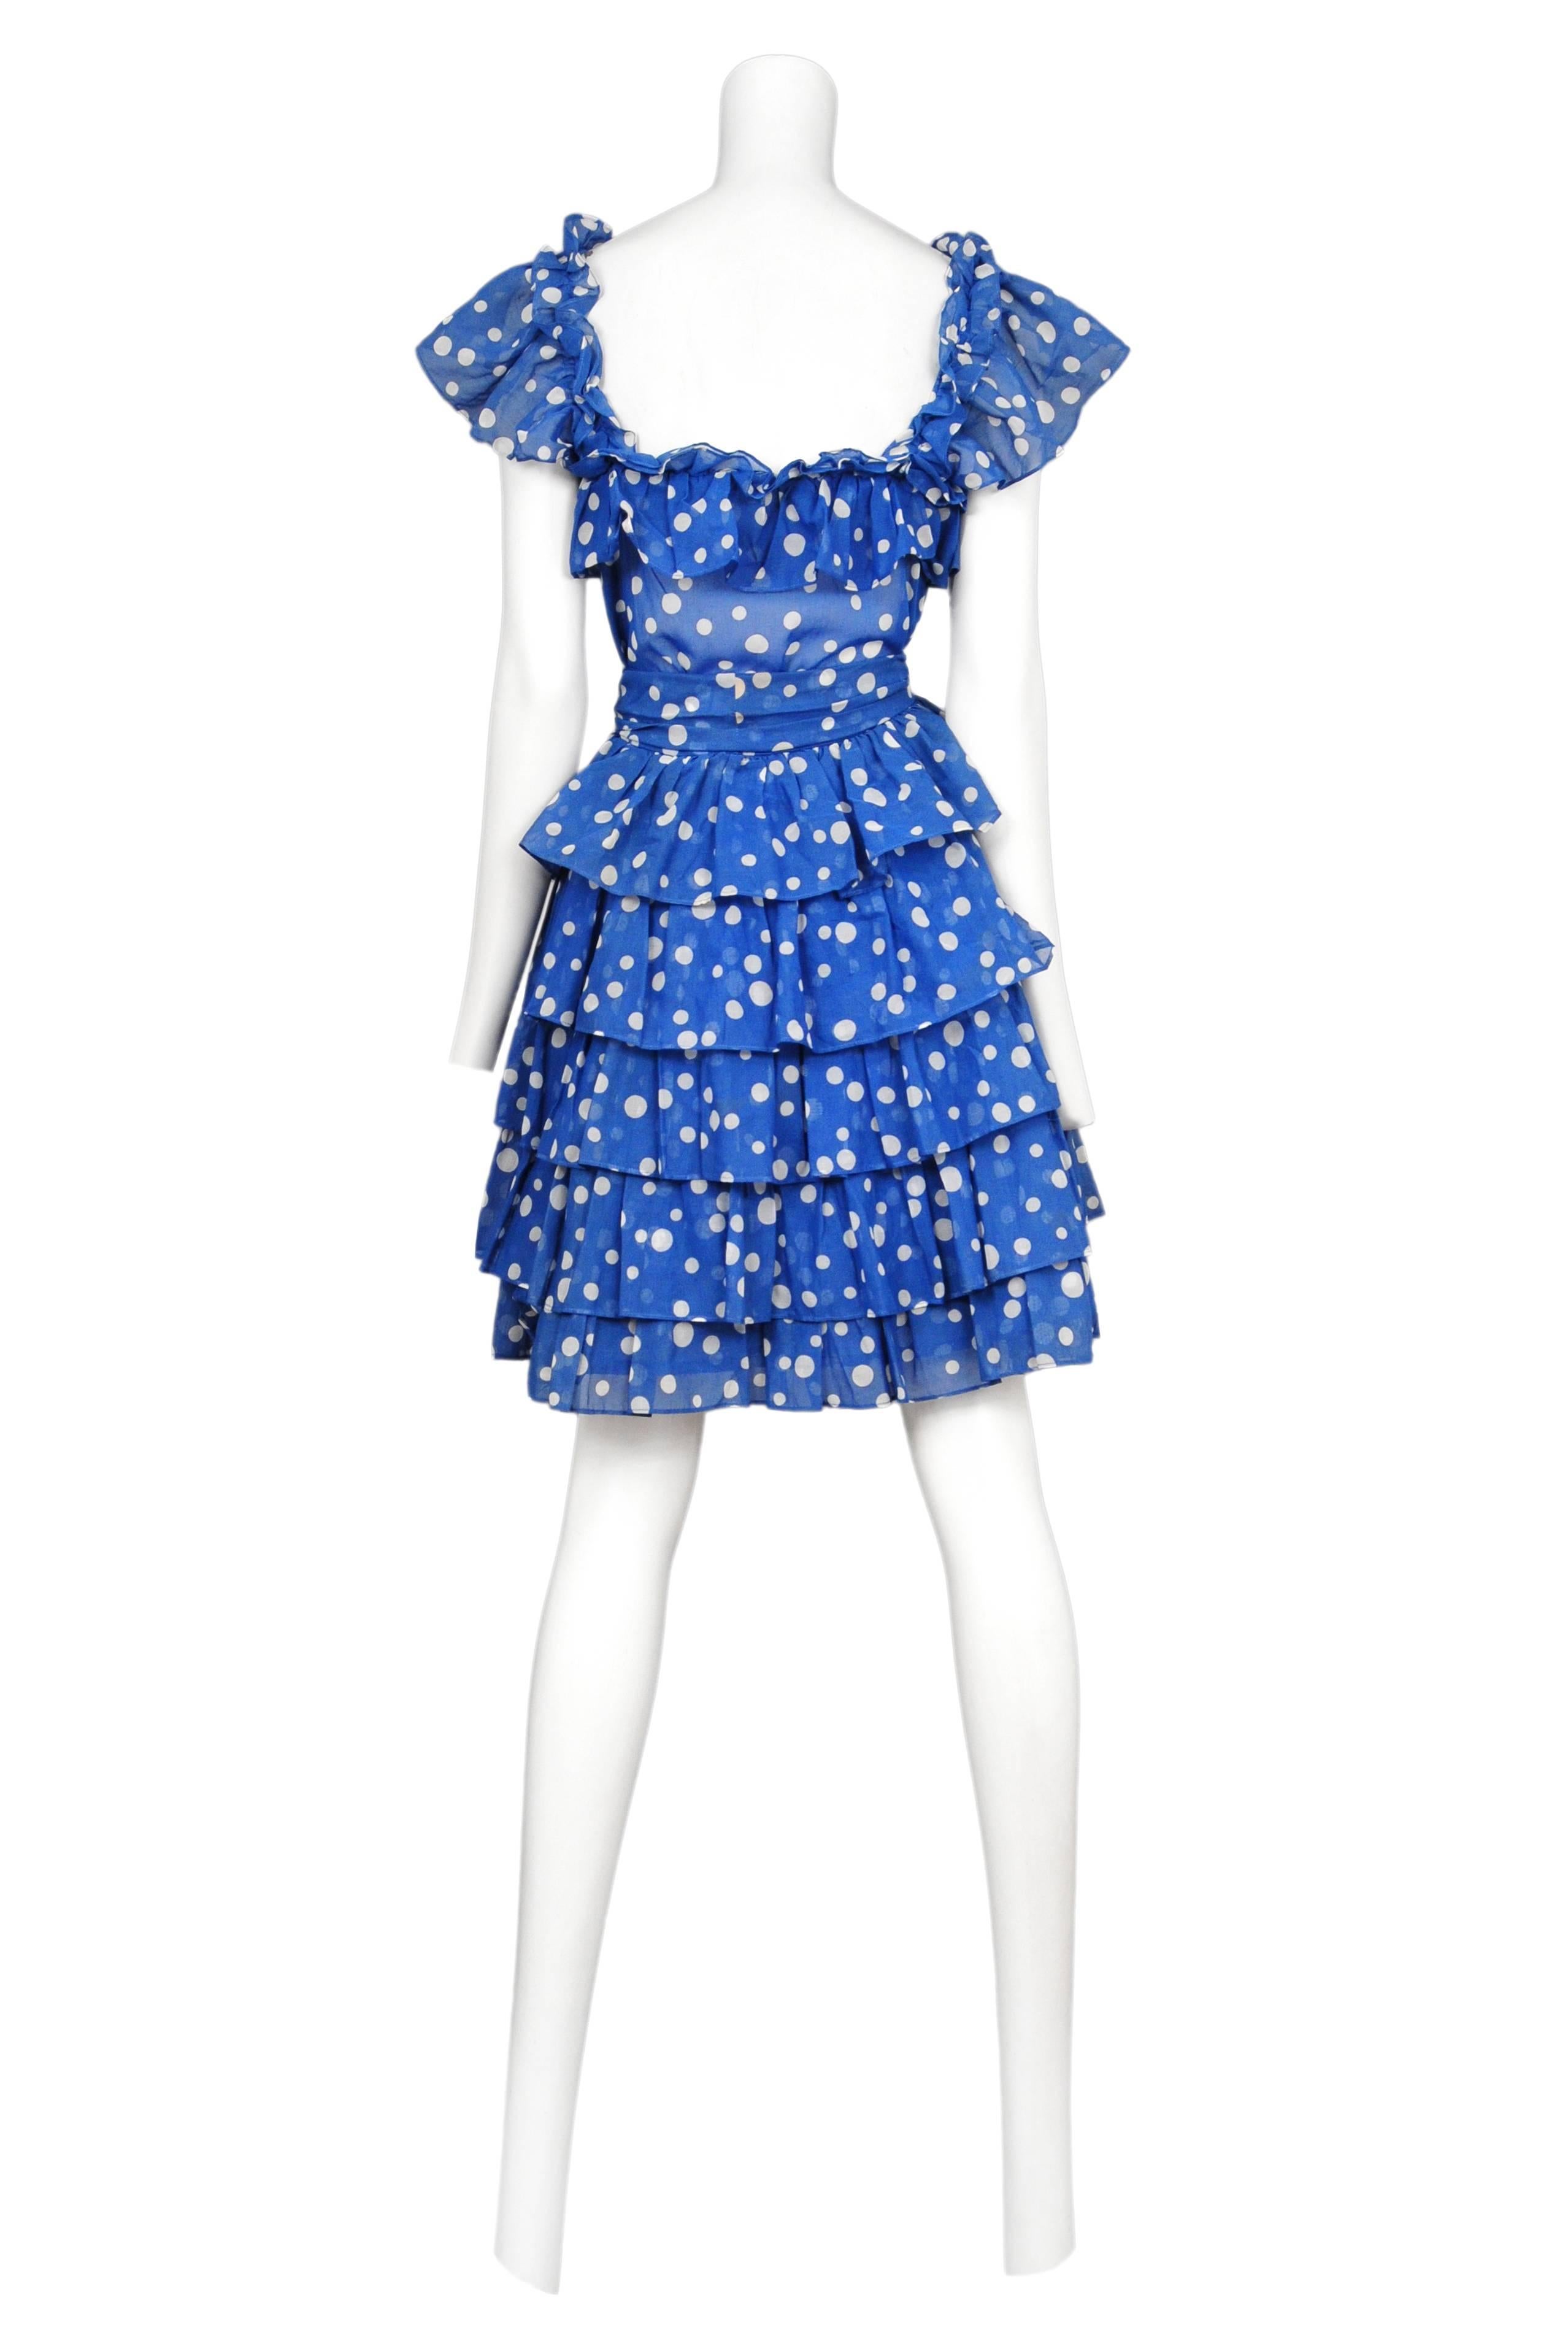 Vintage Yves Saint Laurent blue and white cotton polkadot ensemble featuring a ruffle trim cap sleeve blouse, a multi-tiered ruffle skirt and matching waist sash.